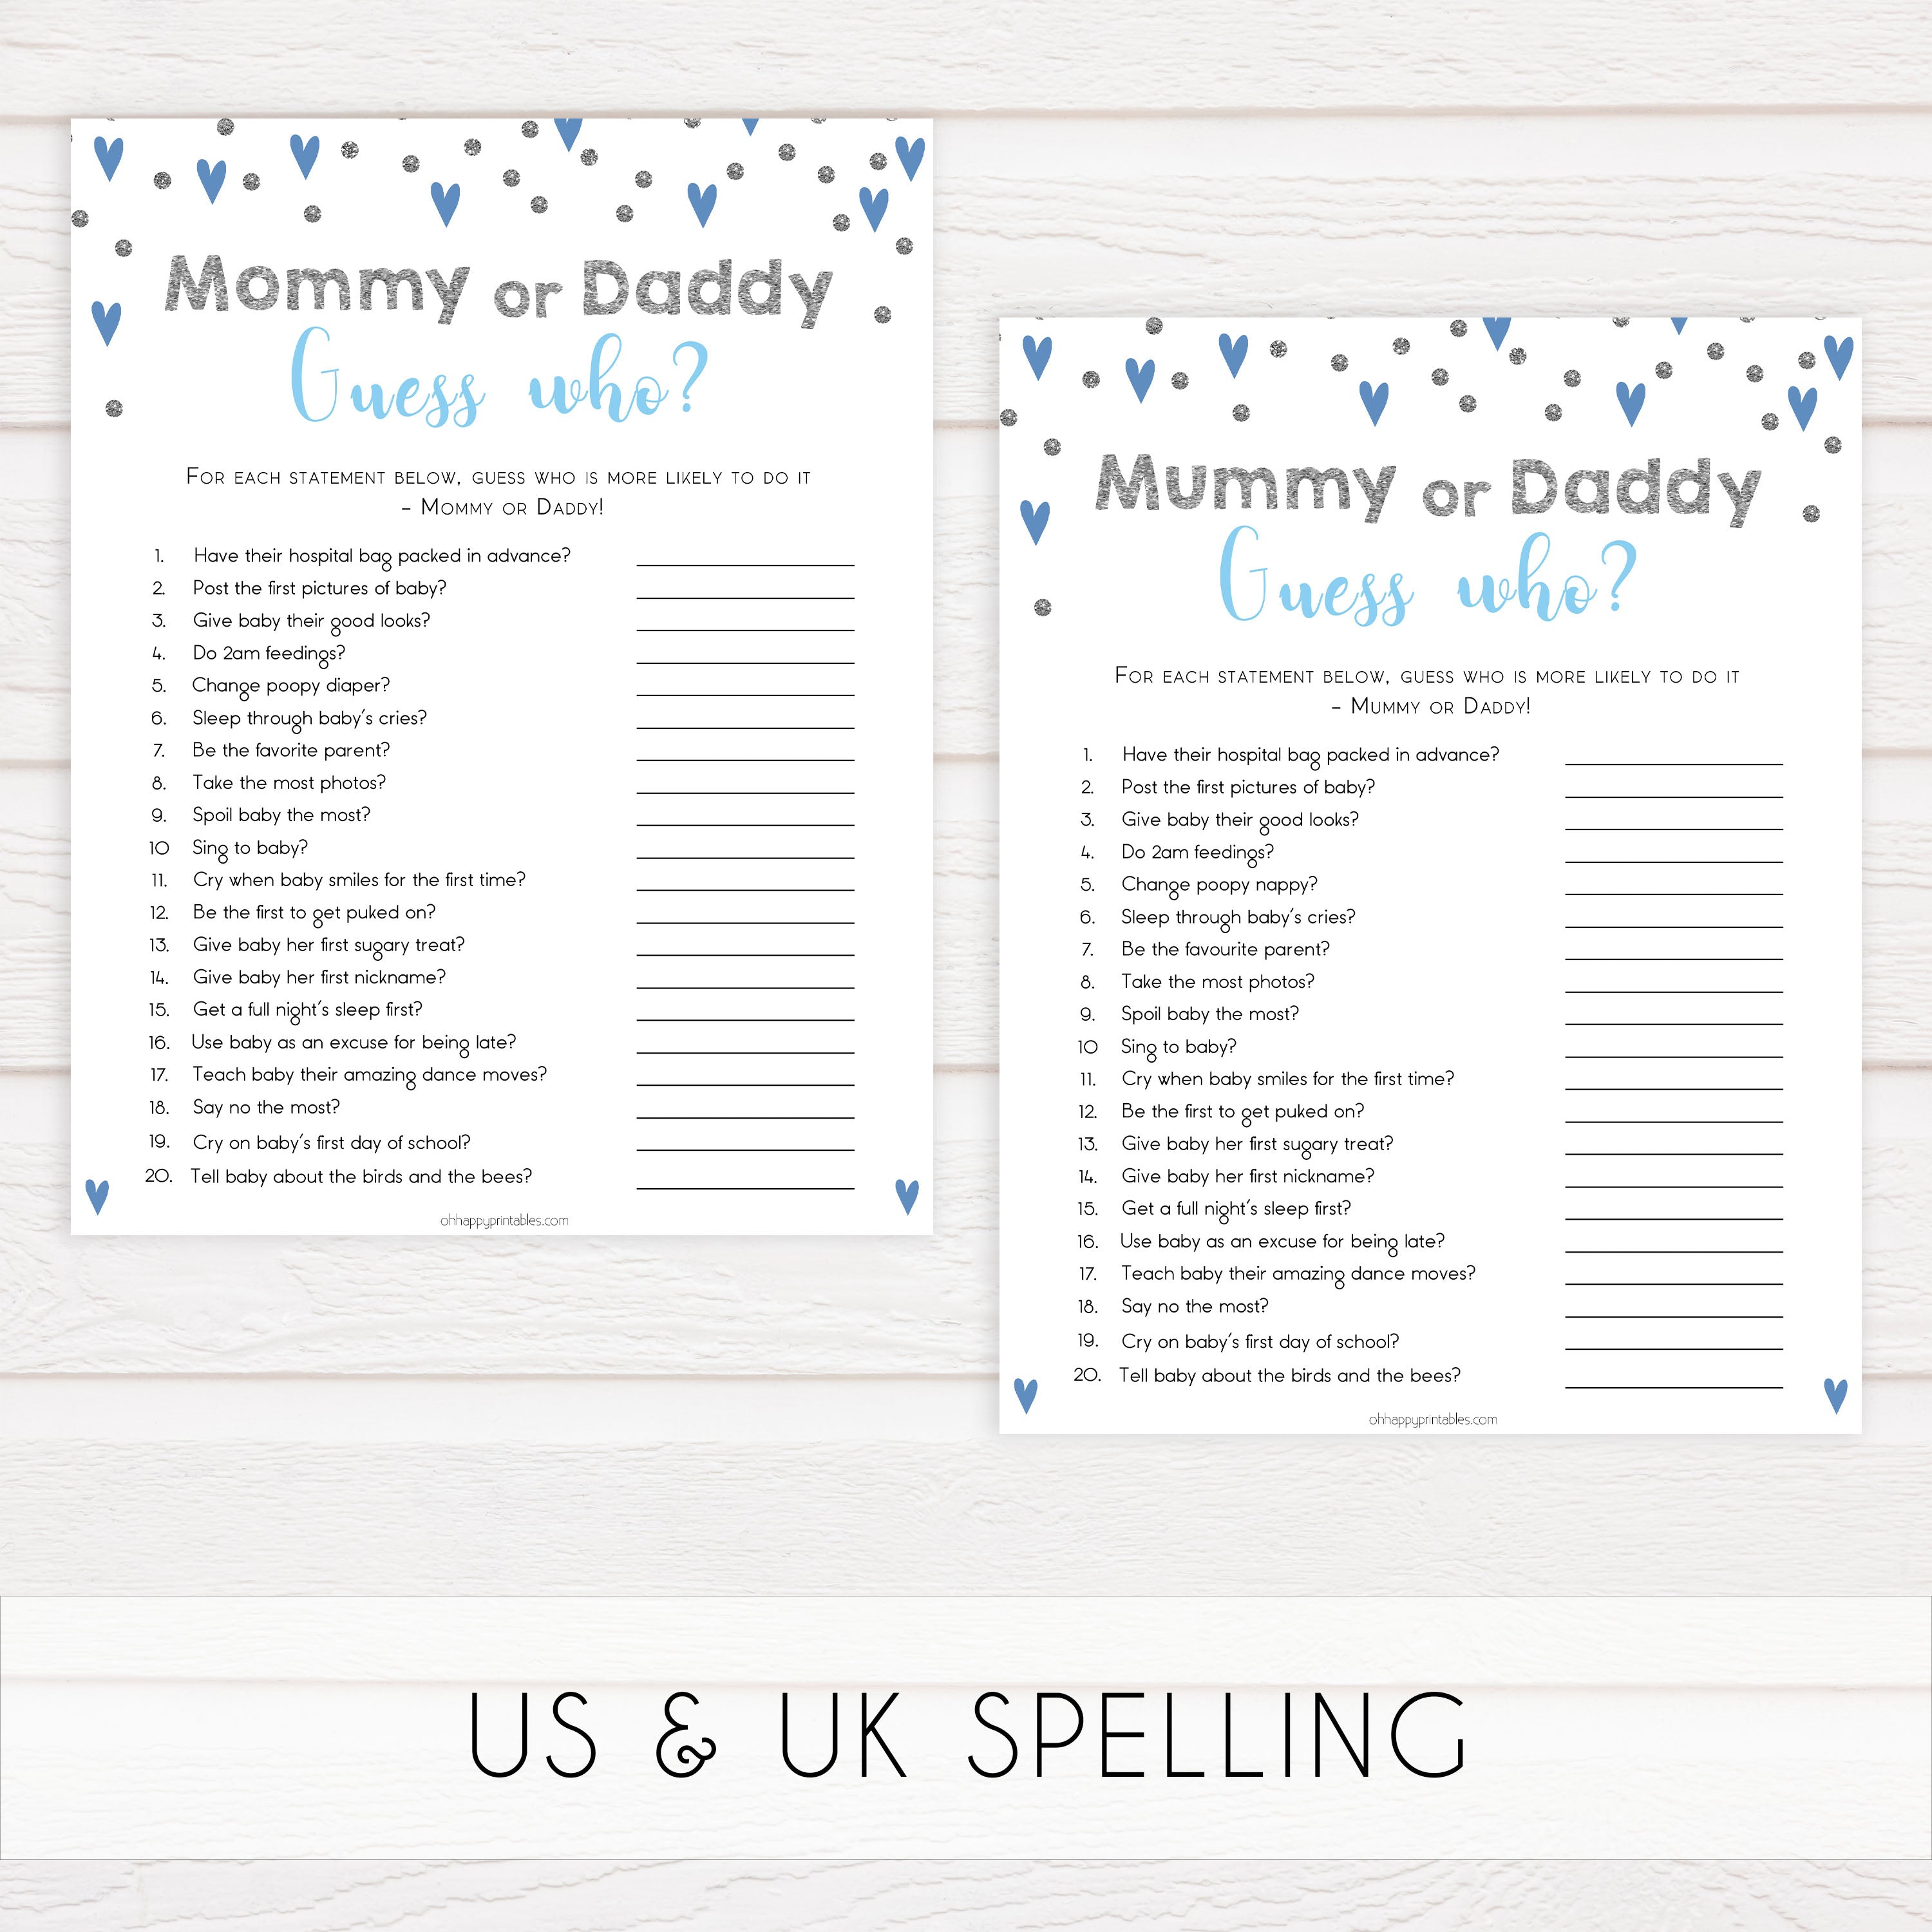 guess who baby game, who said it baby game, Printable baby shower games, small blue hearts fun baby games, baby shower games, fun baby shower ideas, top baby shower ideas, silver baby shower, blue hearts baby shower ideas